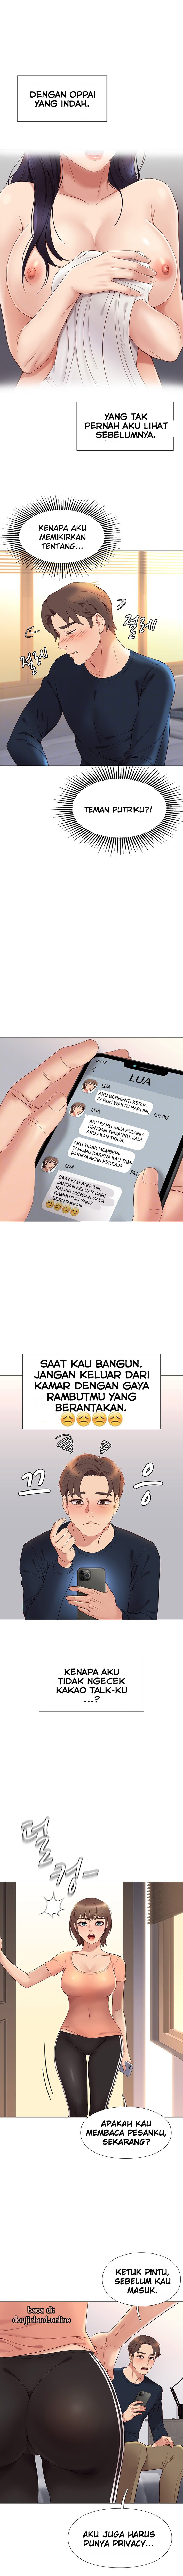 doujinland-daugther-friend-chapter-02-bahasa-indonesia